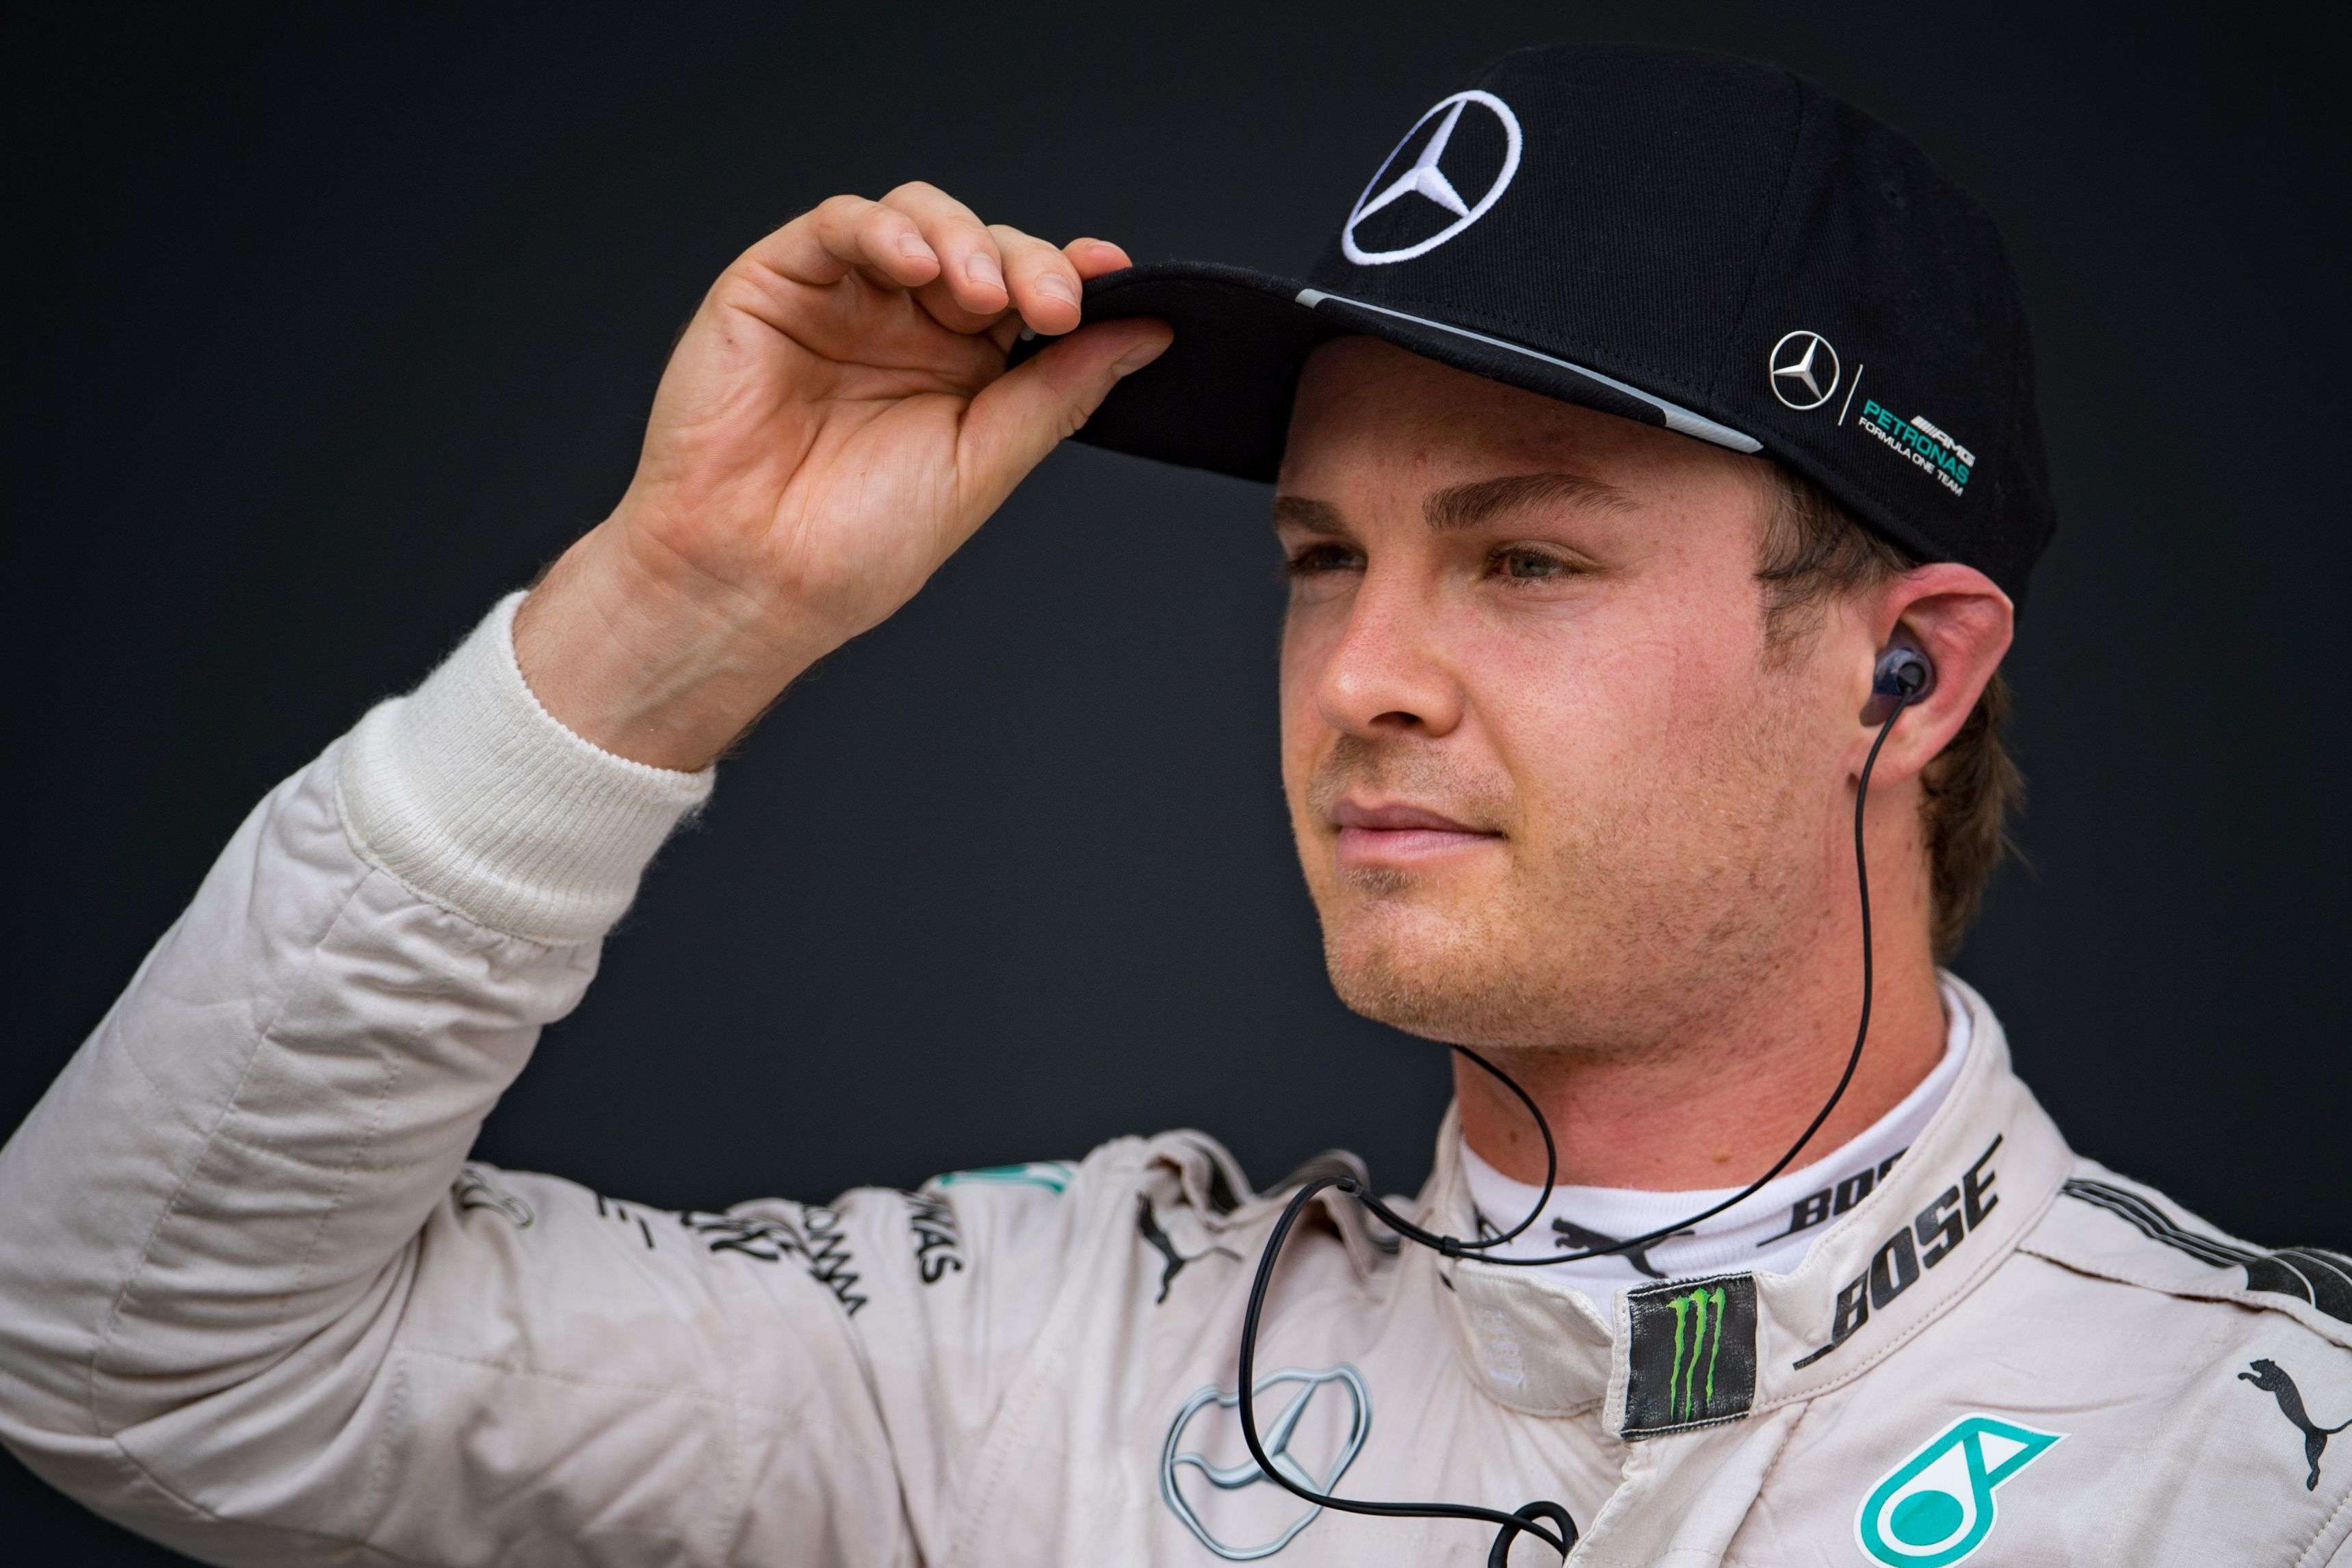 German driver Nico Rosberg is calling it quits in Formula One racing. Photo: AFP